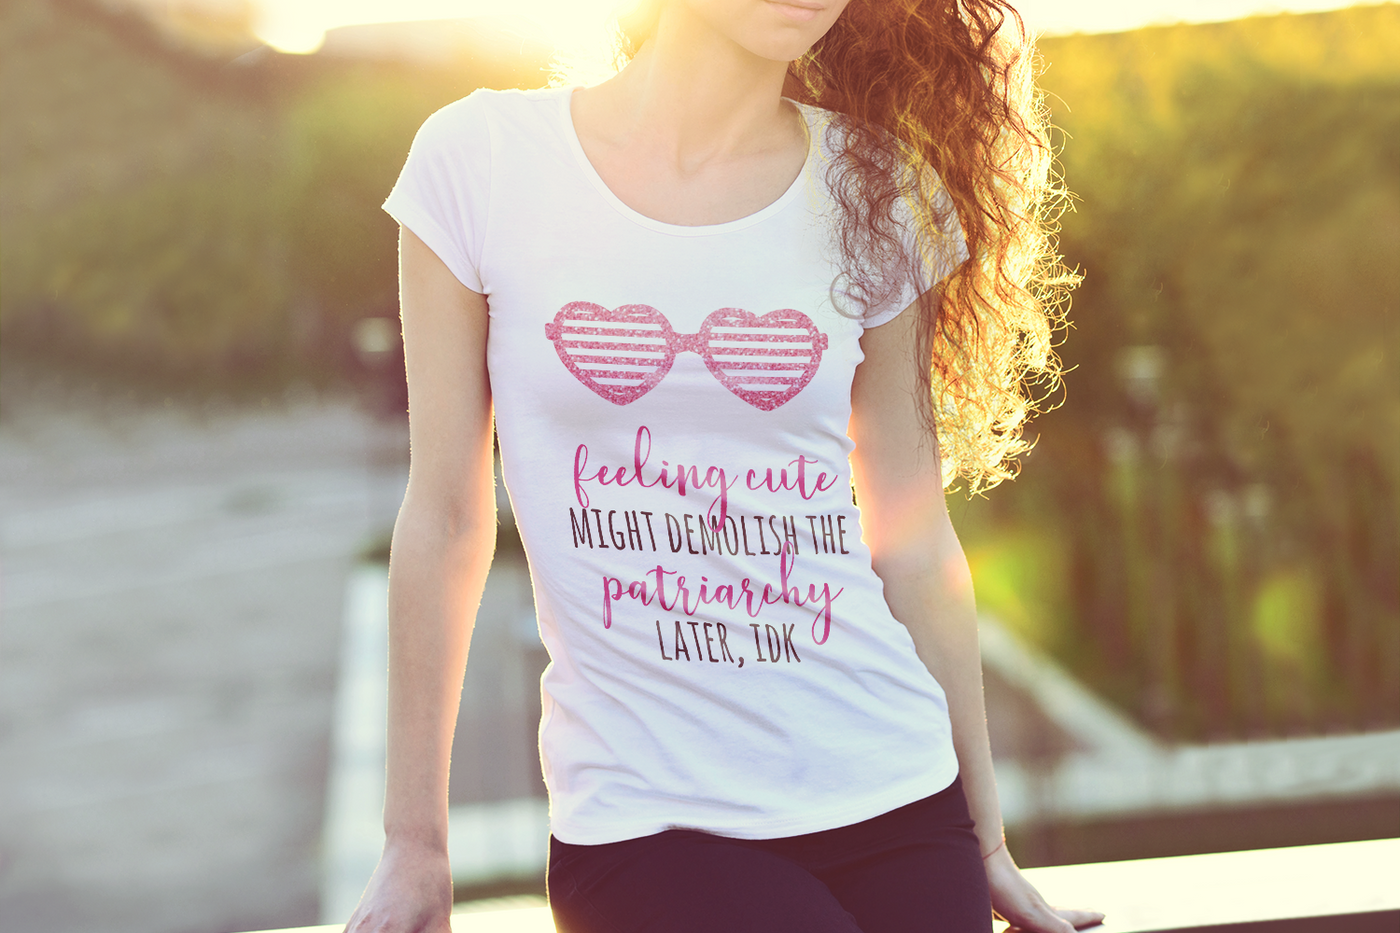 A white woman wearing a white tee. The tee has heart shaped shutter shades and the phrase "feeling cute might demolish the patriarchy later, IDK"